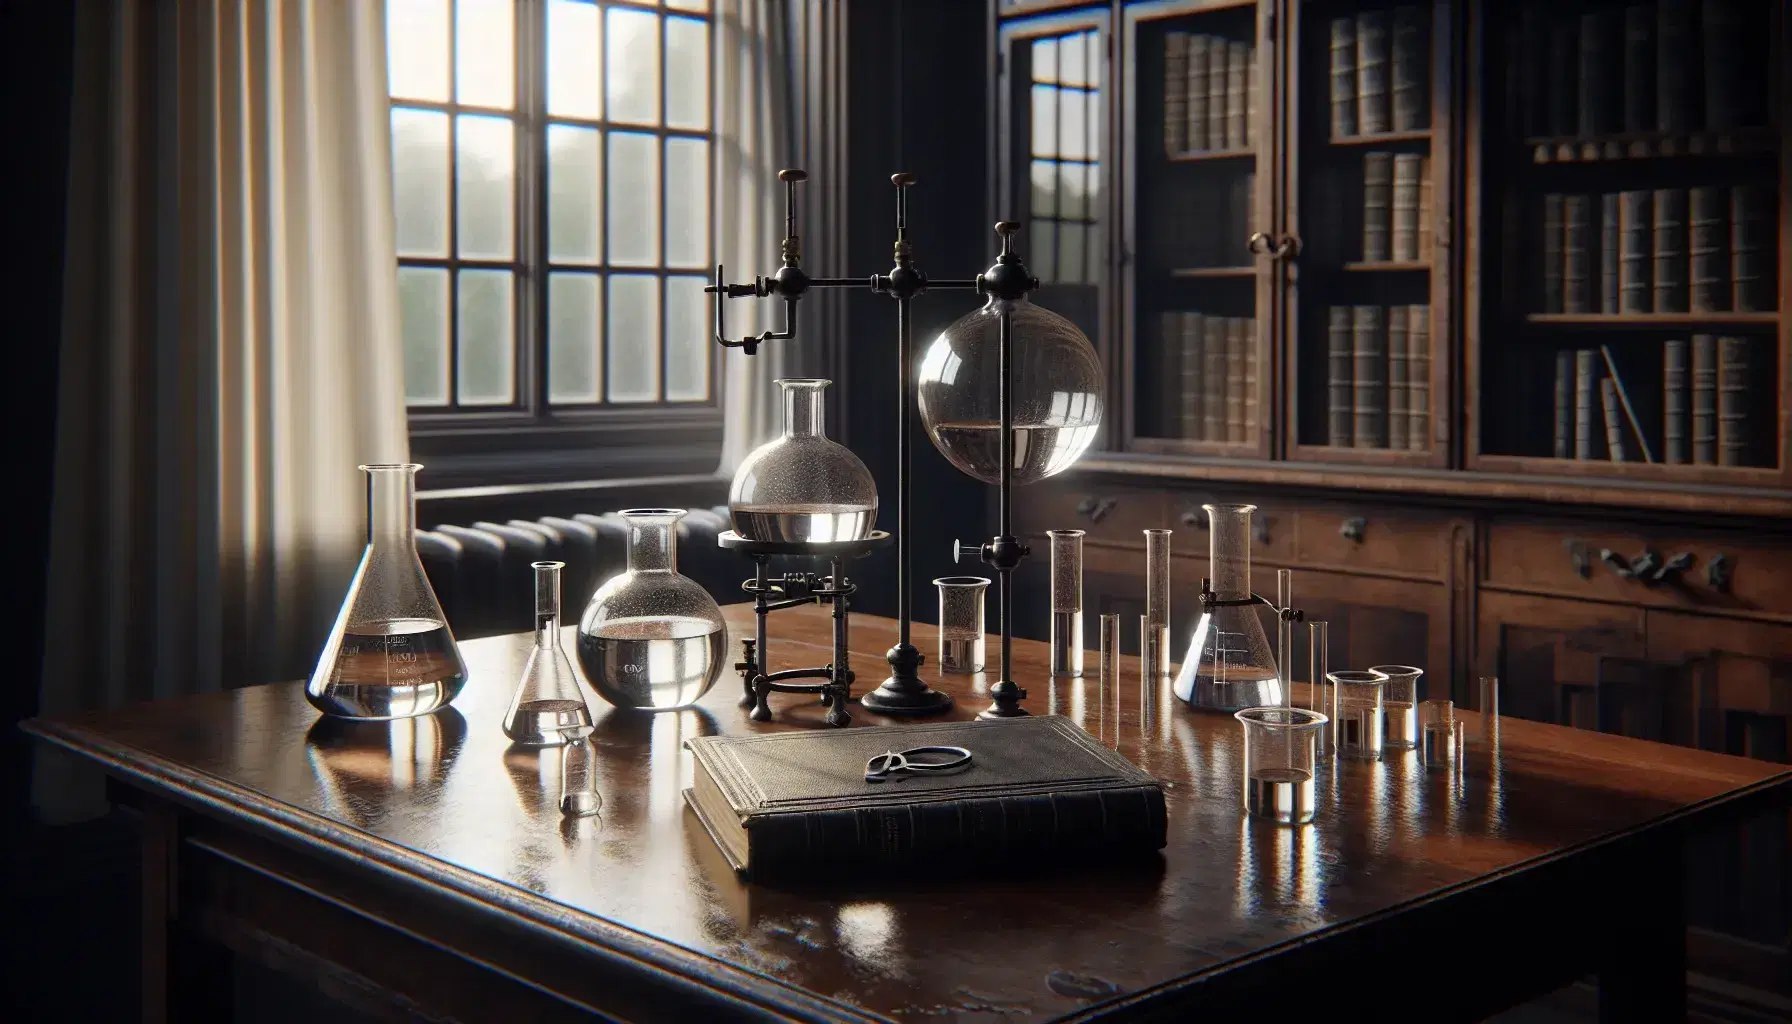 Classic science laboratory with wooden table, transparent glassware, antique book, illuminated window and green plant on the window.